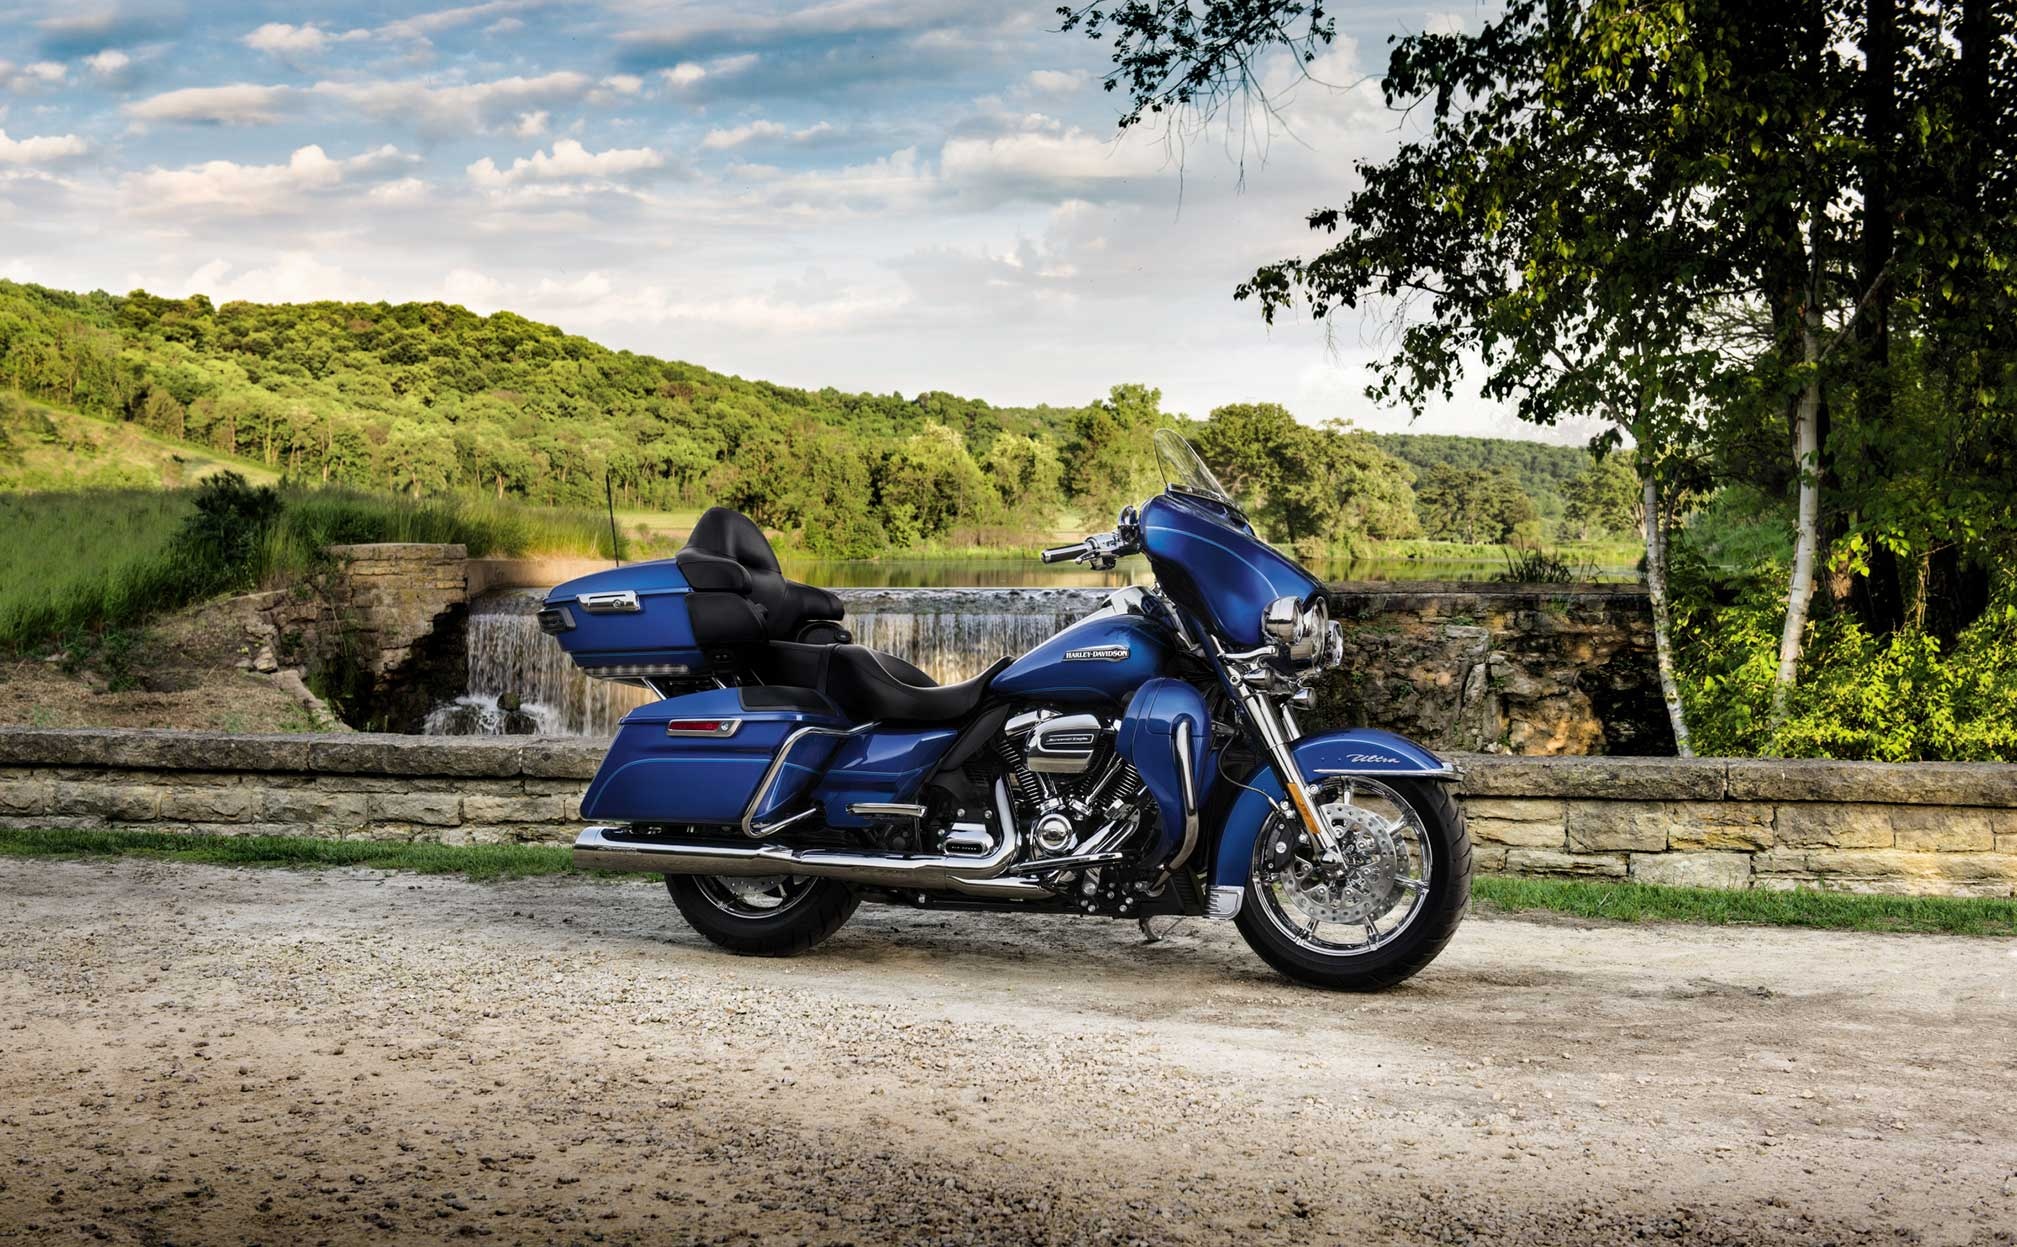 Harley-Davidson Electra Glide Revival, Ultra Classic, Iconic Motorcycle, Classic Styling, 2020x1250 HD Desktop